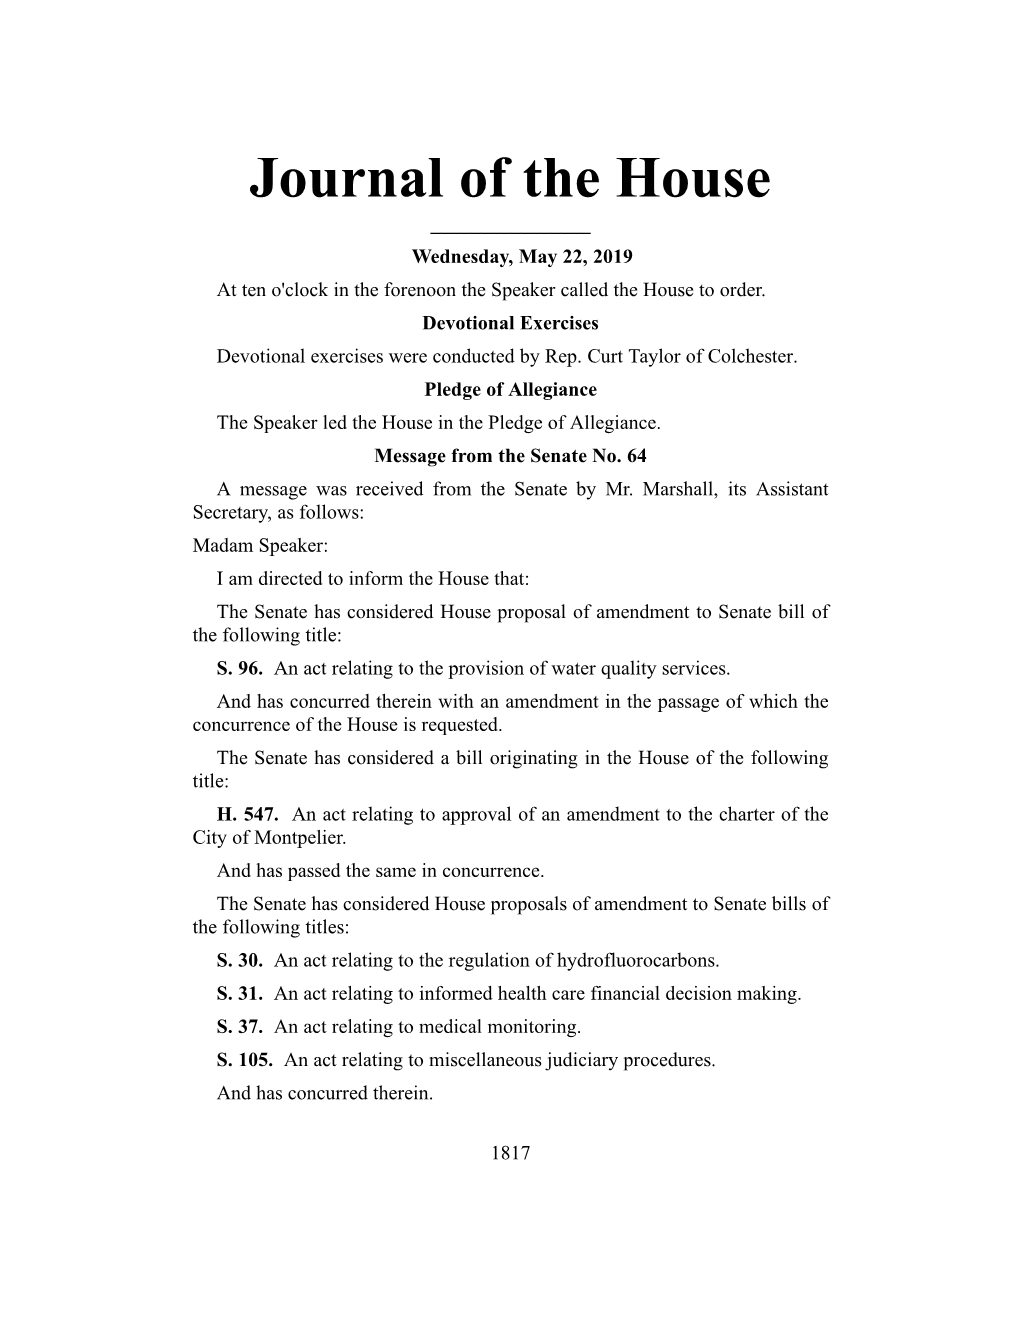 Journal of the House ______Wednesday, May 22, 2019 at Ten O'clock in the Forenoon the Speaker Called the House to Order